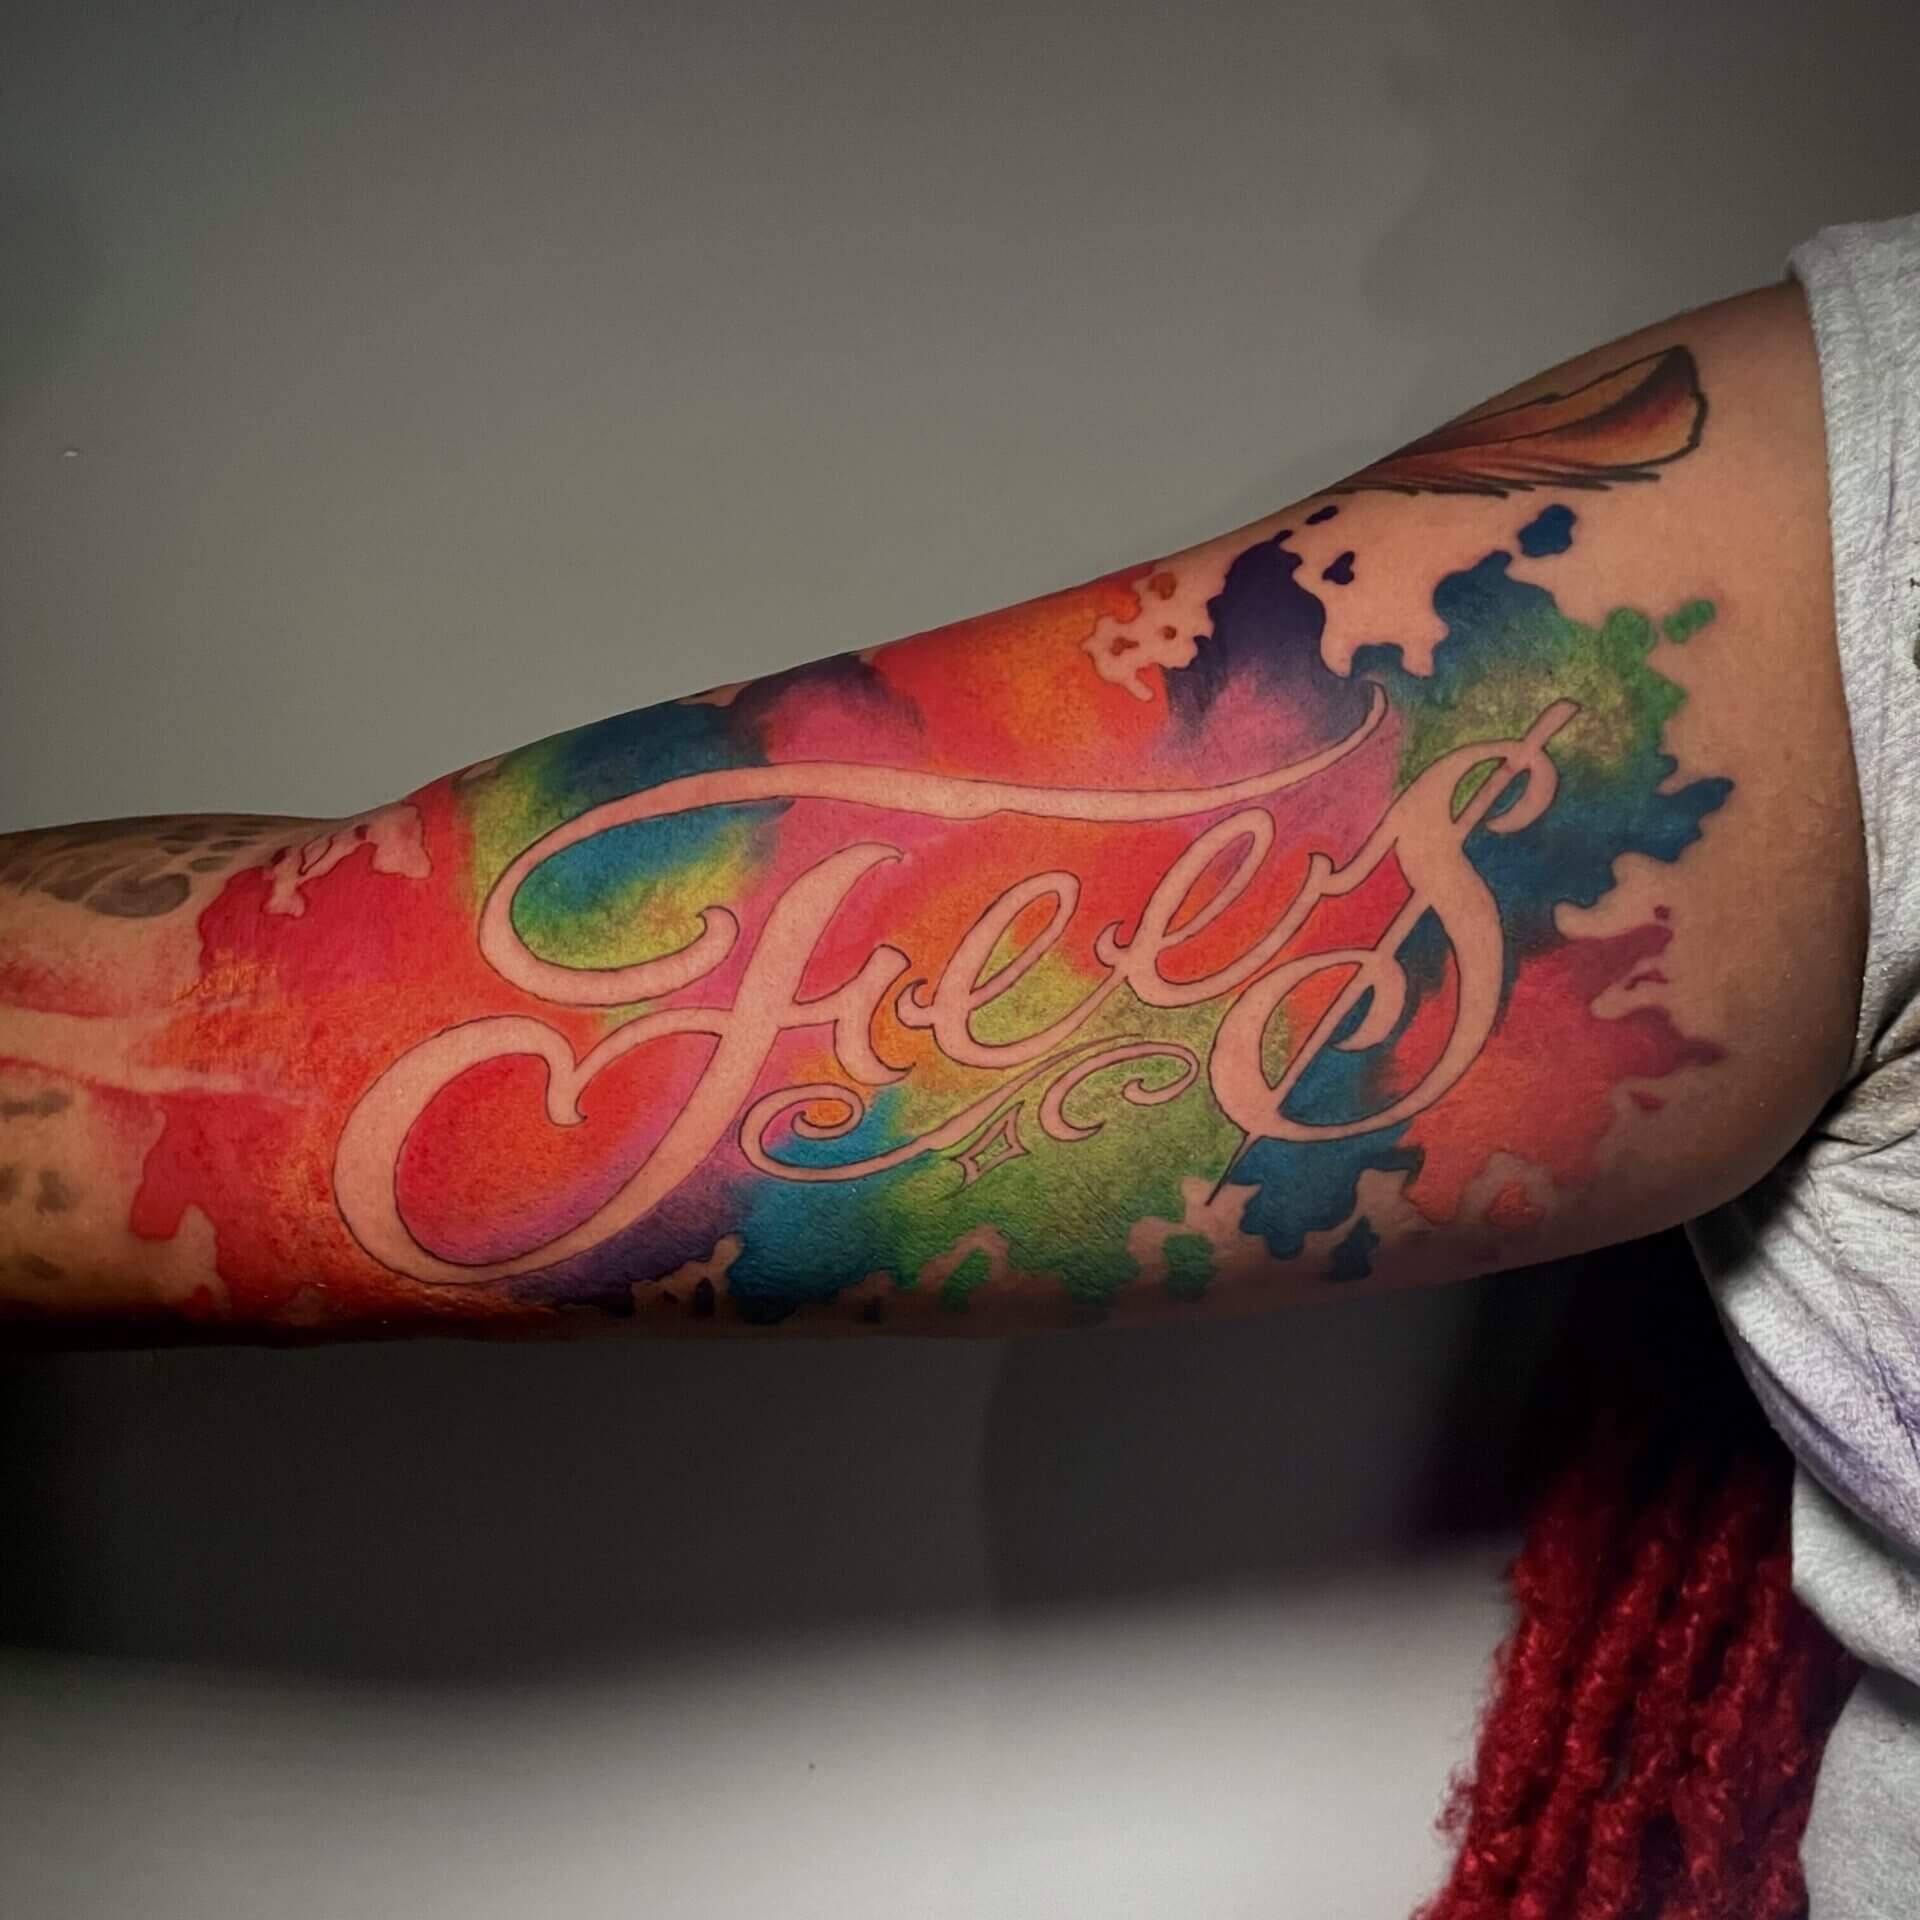 Water Color Script tattoo by Lyric the artist at Iron Palm Tattoos in Atlanta, Georgia. Walk-ins accepted. Call 404-973-7828 or stop by for a free consultation.